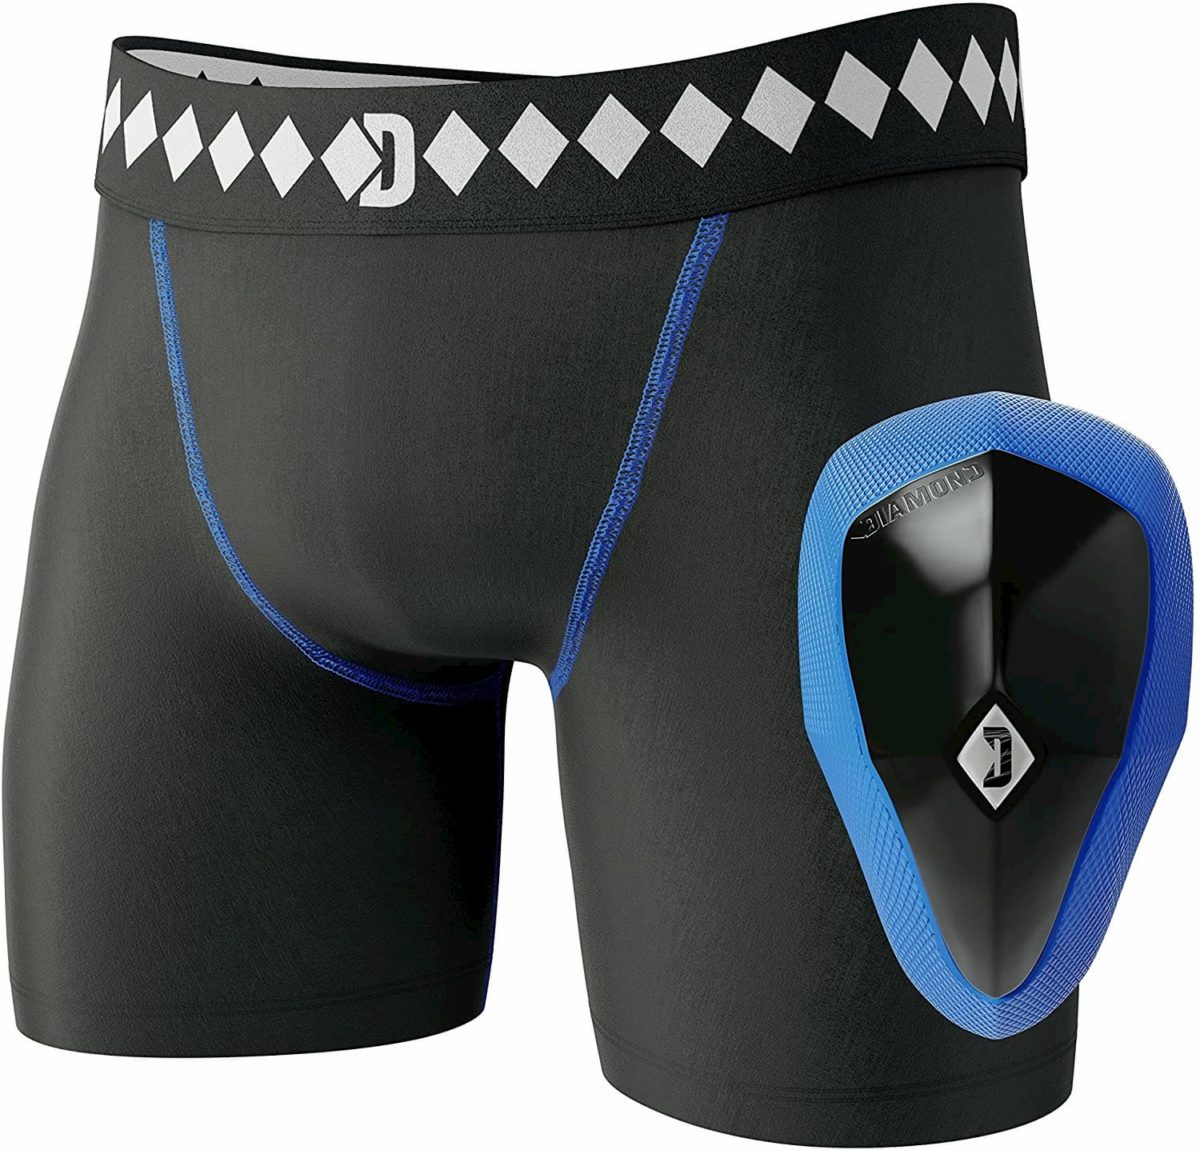 Diamond MMA BJJ Athletic Cup Groin Protector & Compression Shorts System